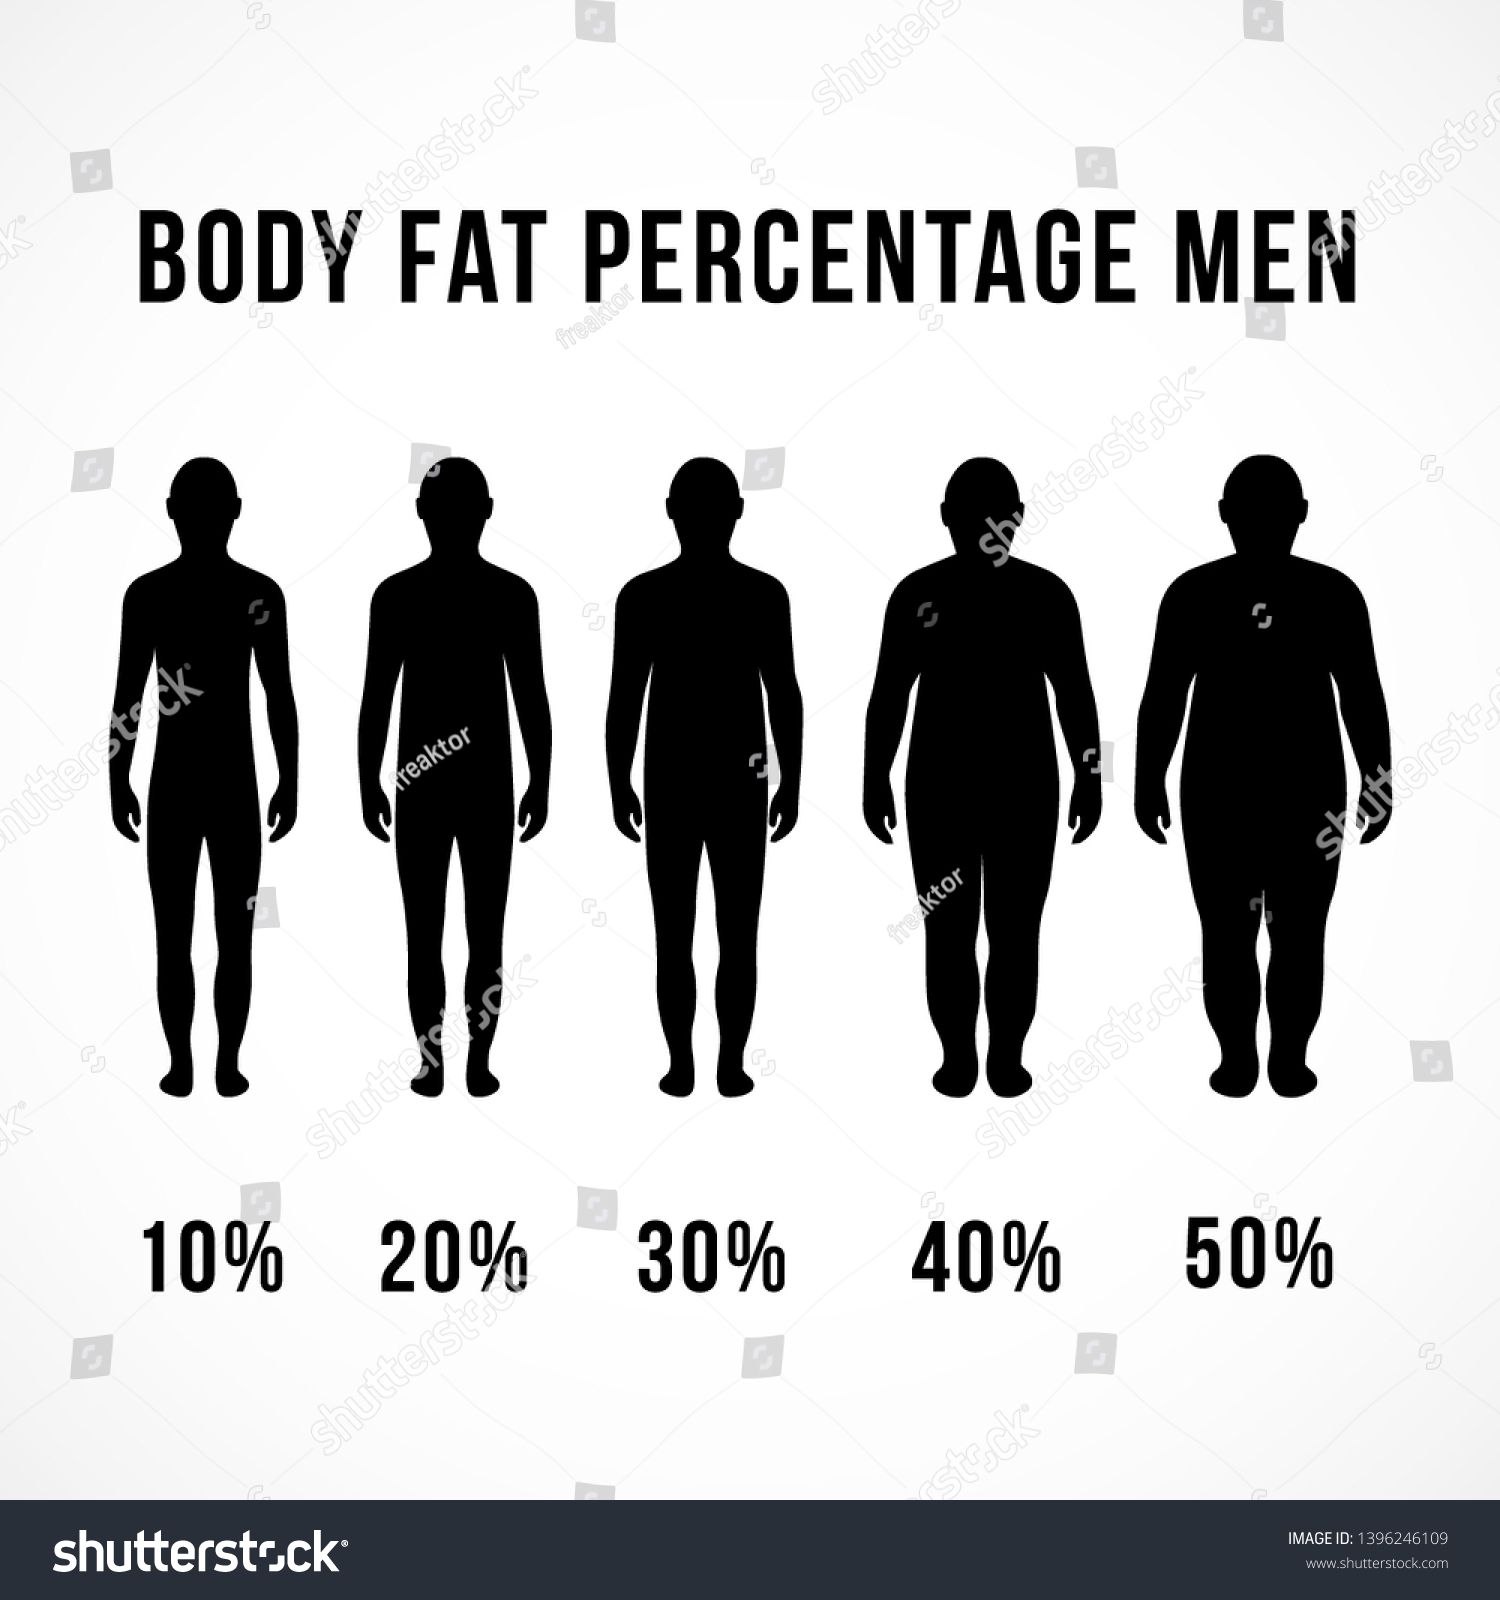 SVG of body fat percentage human designs concept vector.
diets and exercises before and after from fat to fitness. svg